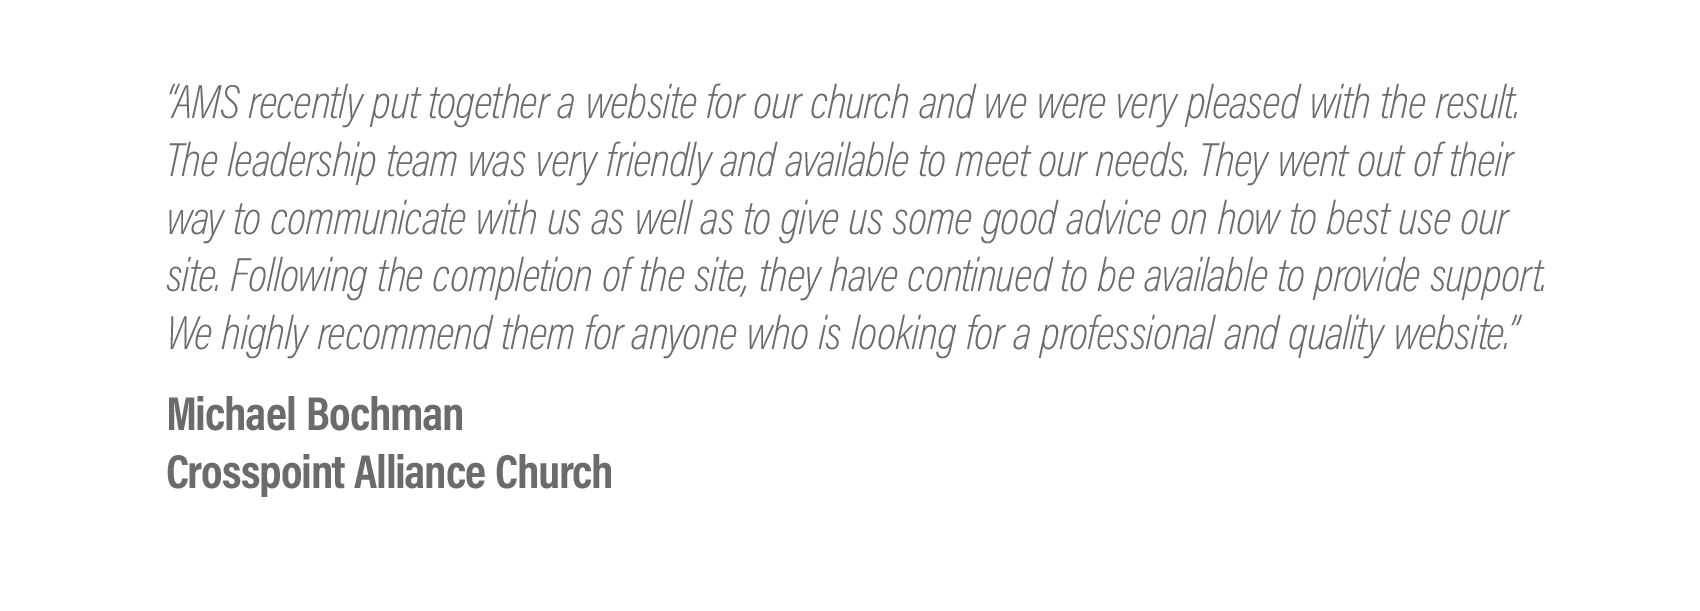  “AMS recently put together a website for our church and we were very pleased with the result. The leadership team was very friendly and available to meet our needs. They went out of their way to communicate with us as well as to give us some good ad